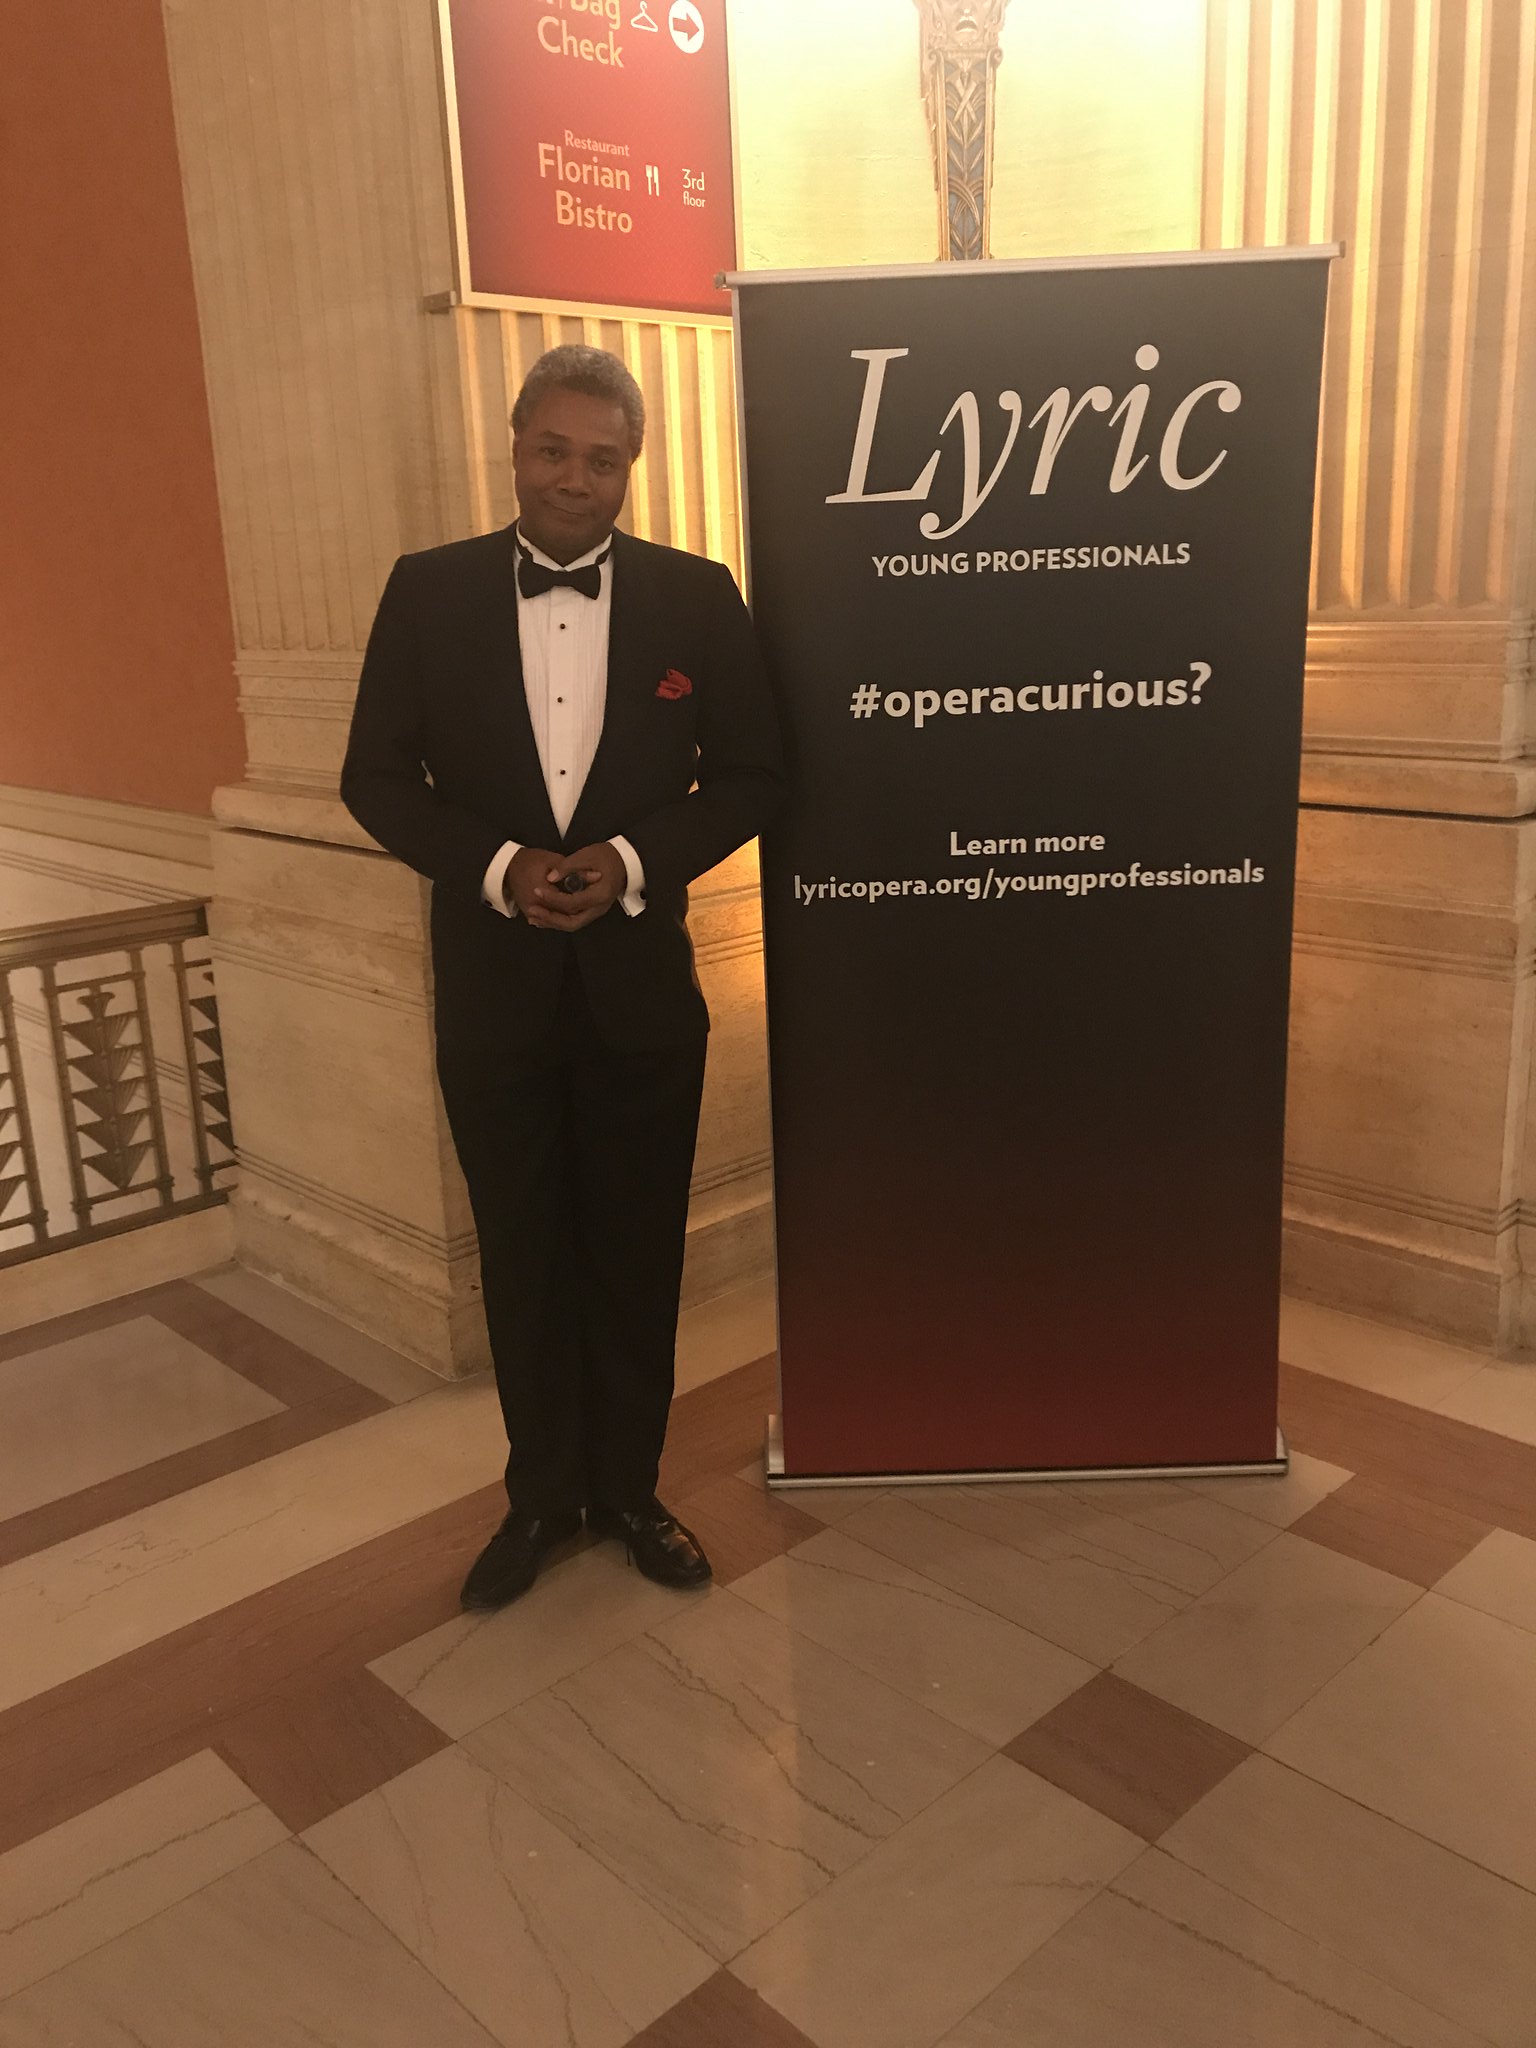 Curious?: For Darryl Maximilian Robinson, meeting, greeting, seating and directing Guests to where they desire and want to be at The Historic Lyric Opera House of Chicago was more than fun. An honor.